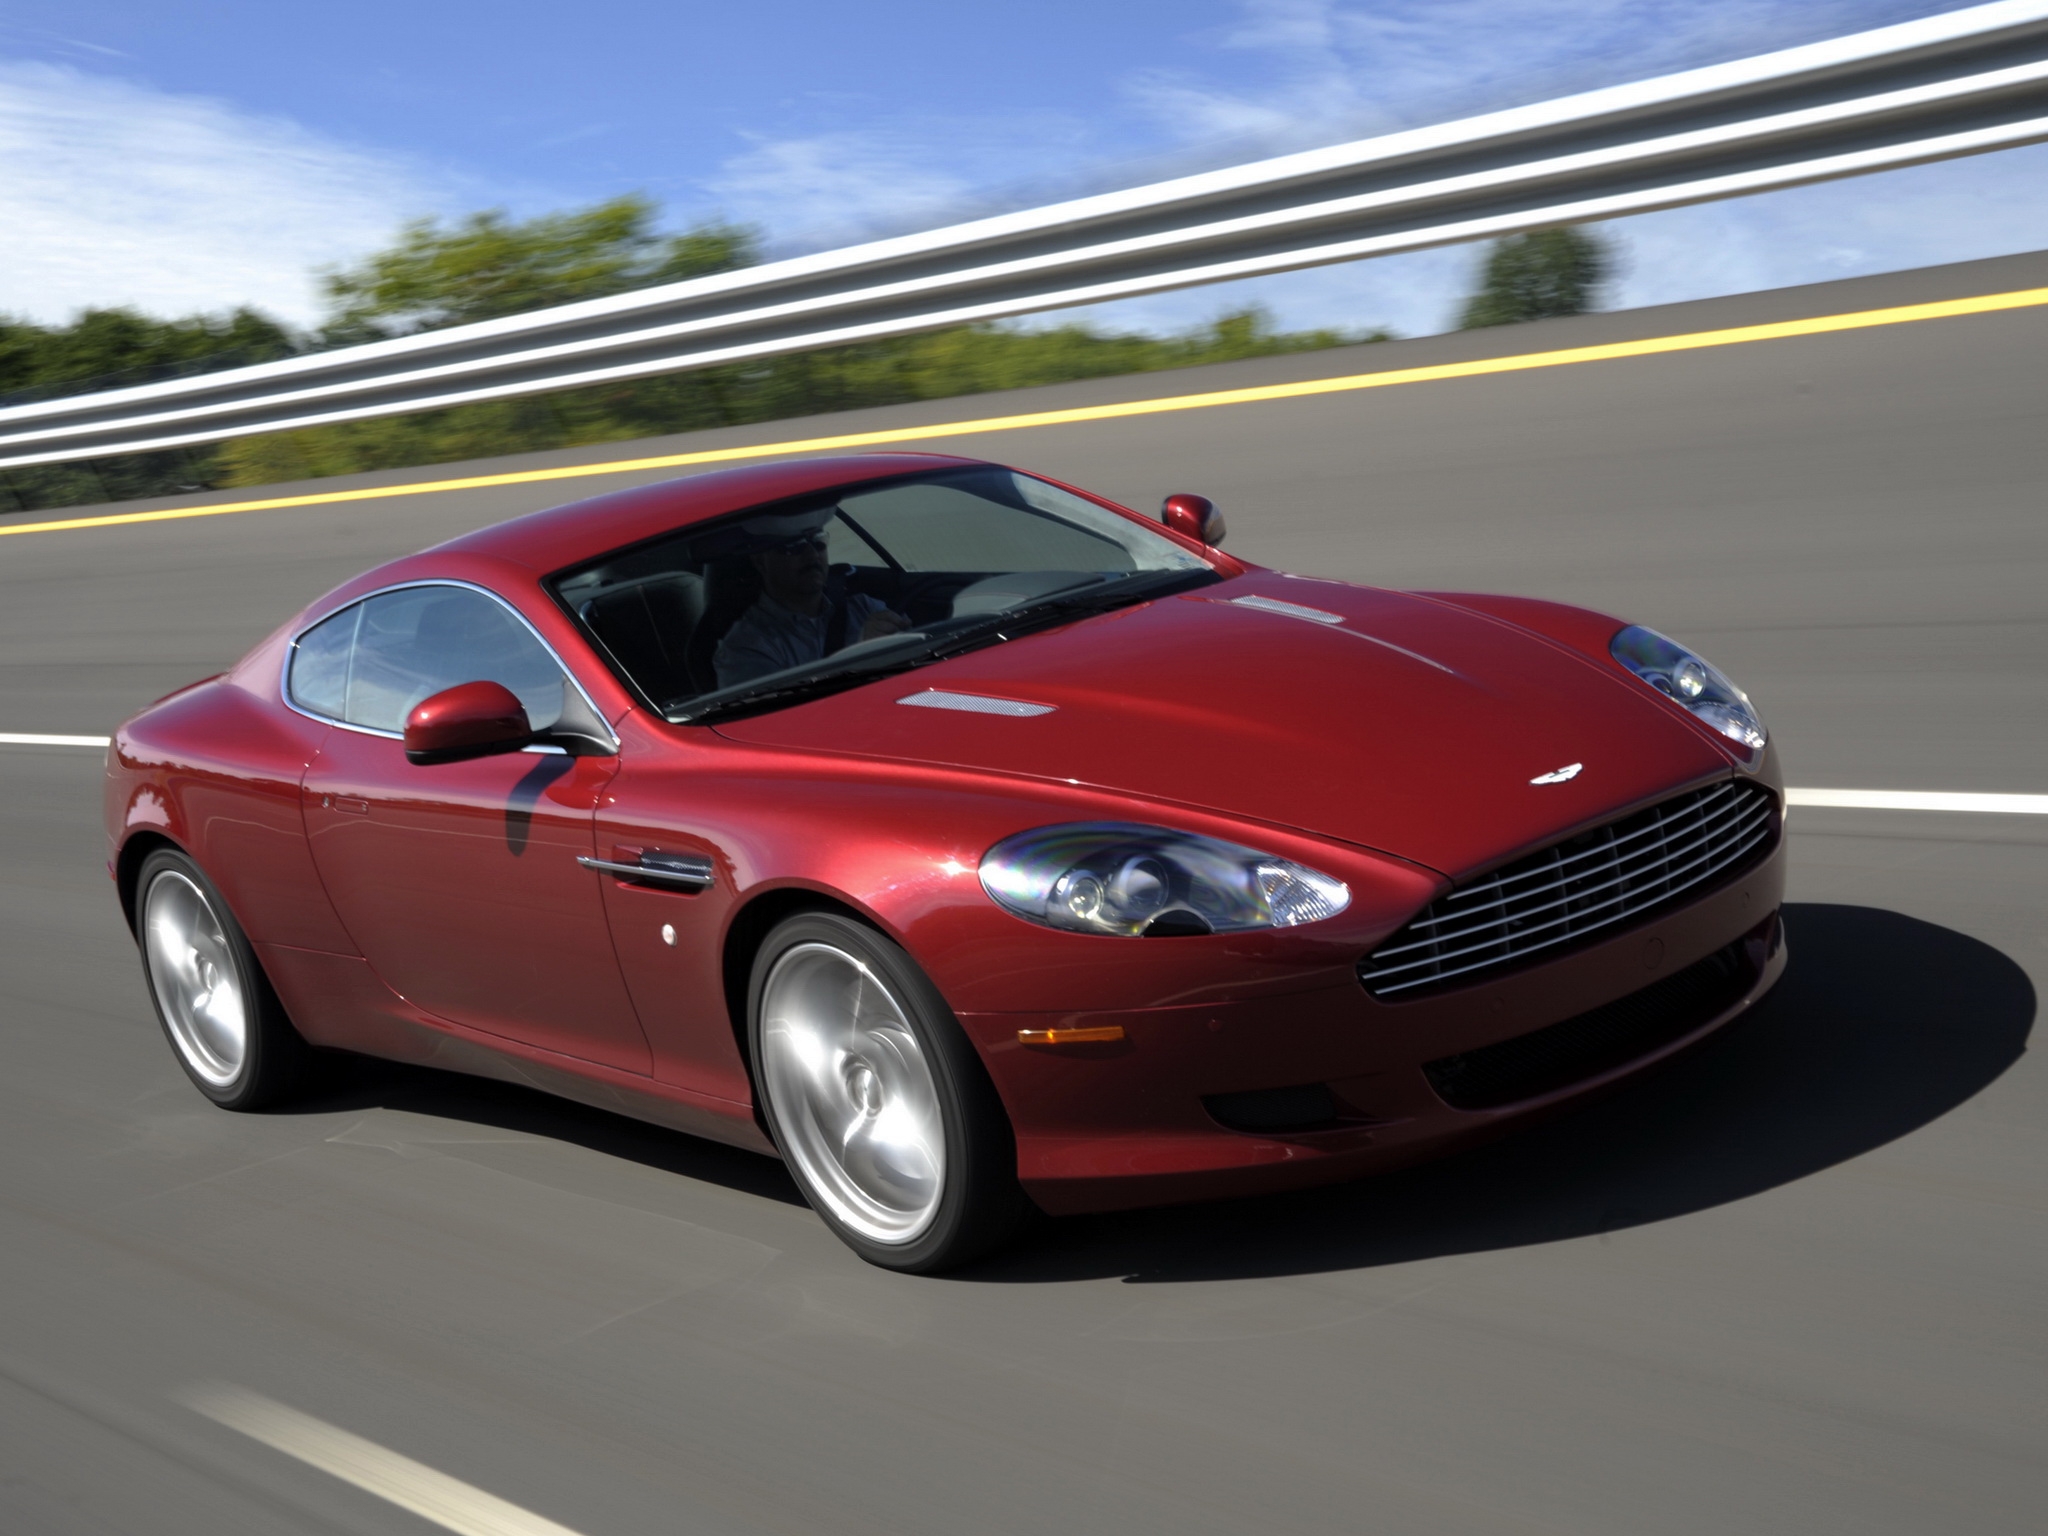 auto, trees, aston martin, cars, red, asphalt, side view, speed, style, 2008, db9